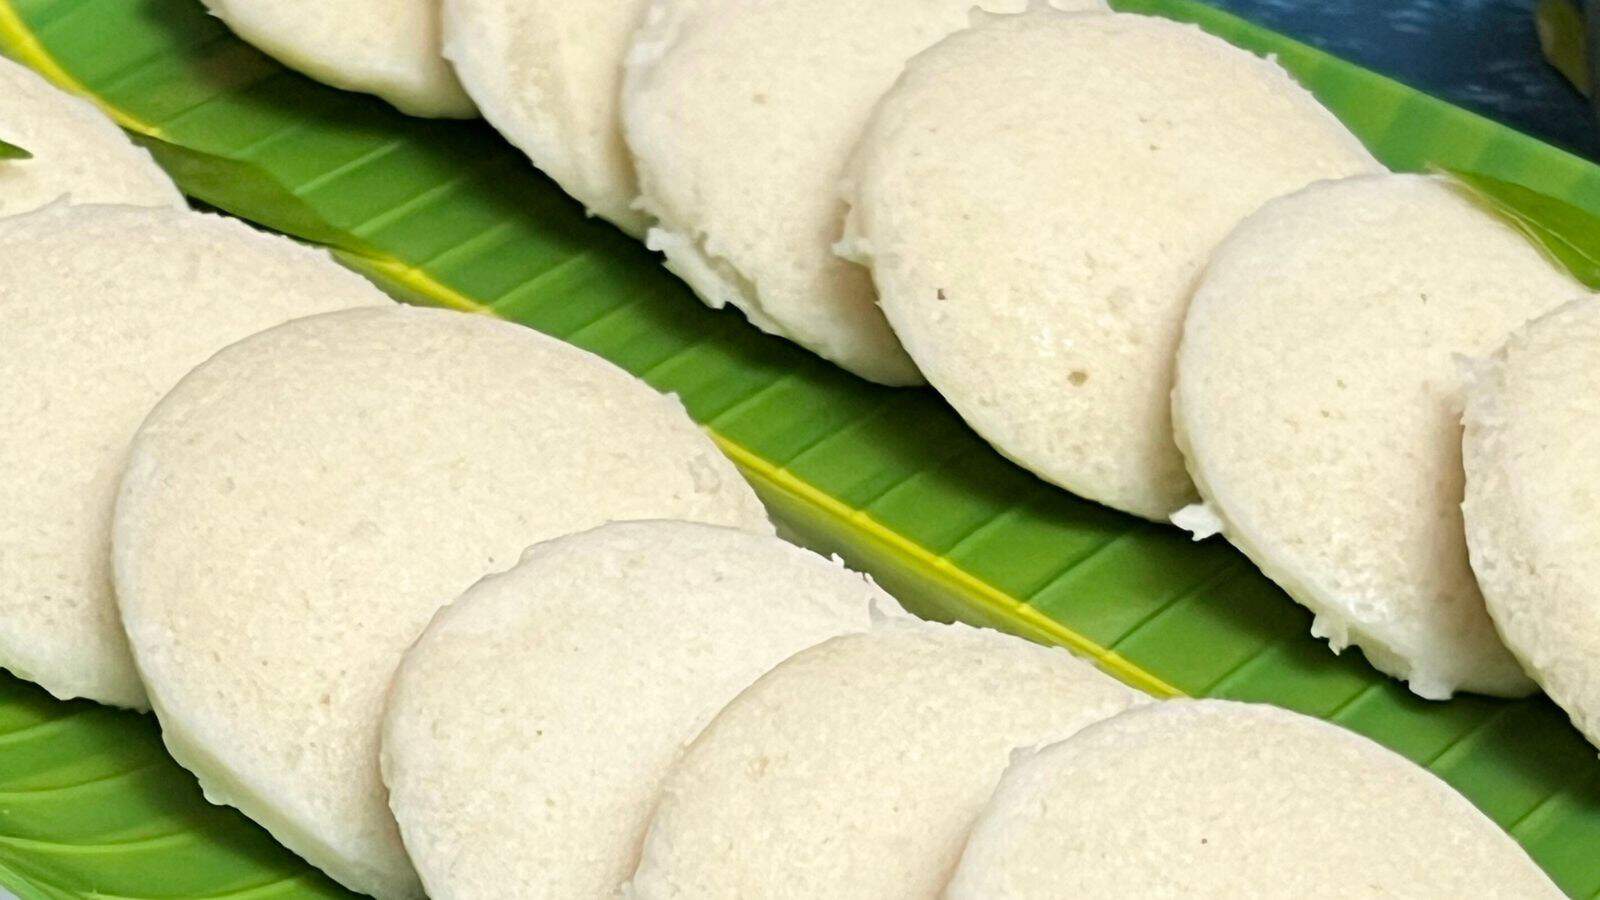 A row of idli, a traditional south indian steamed rice cake, served on a green banana leaf.